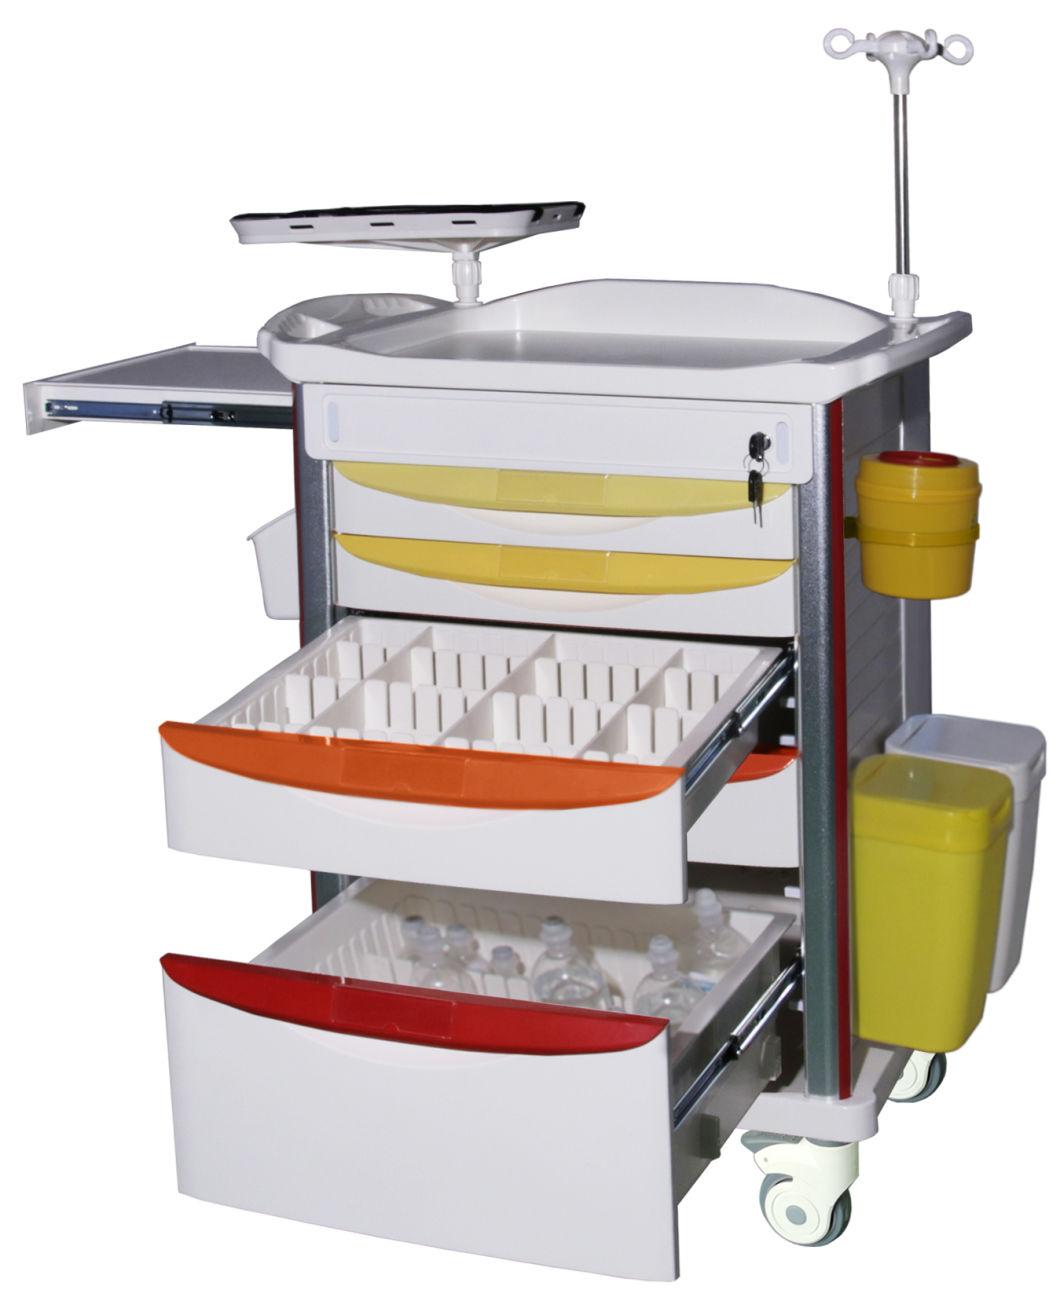 Mn-Ec005 High Quality Nursing Patinet Hospital Furniture Medical Cart ABS Clinical Trolley